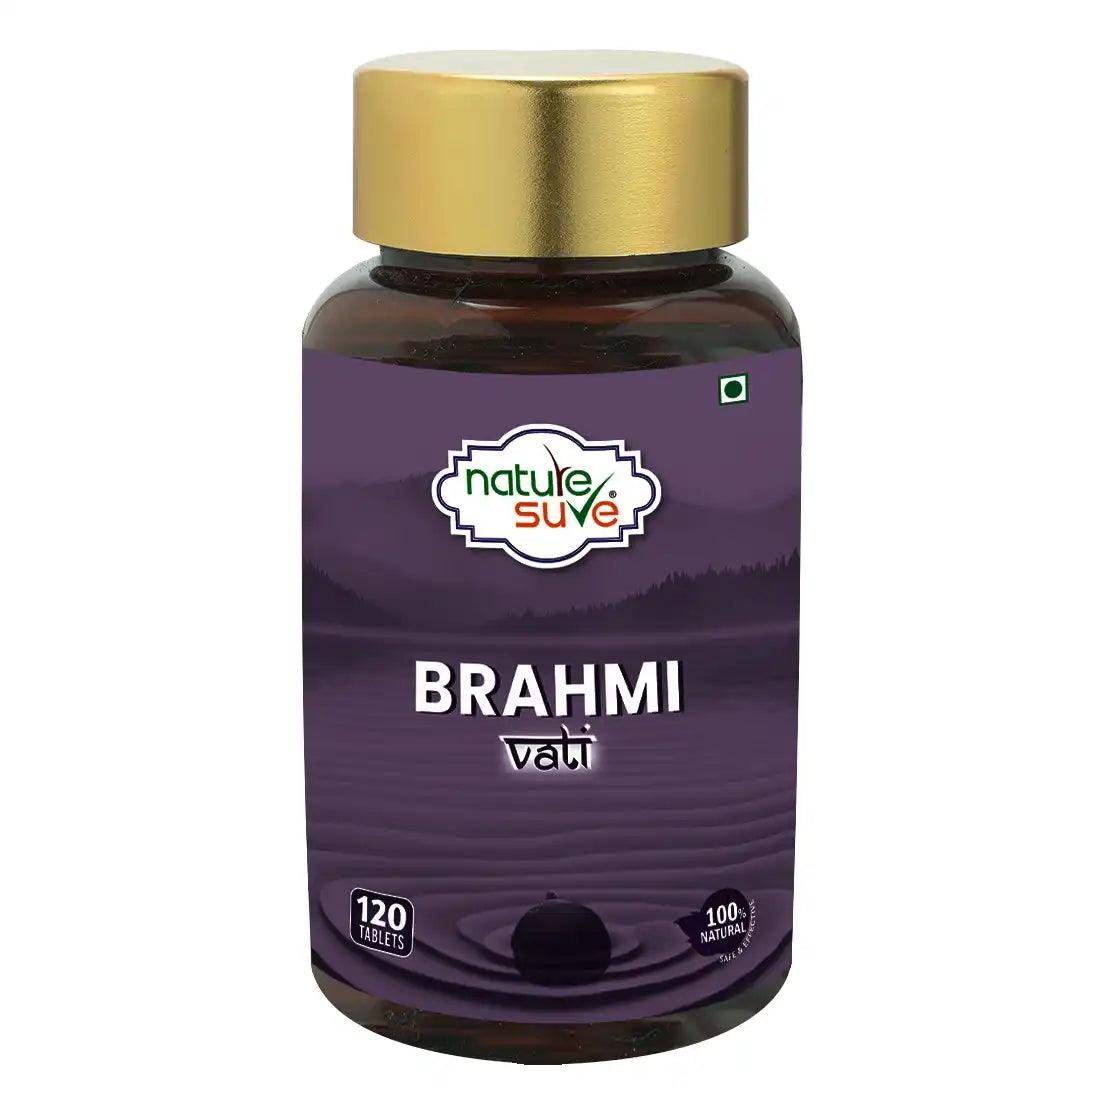 Nature Sure Brahmi Vati 120 Buddhiwardhak Ayurvedic Tablets for Brain Health, Memory Boost, Mental Alertness and Mind Relaxation in Men and Women - Official Brand Store: everteen | NEUD | Nature Sure | ManSure